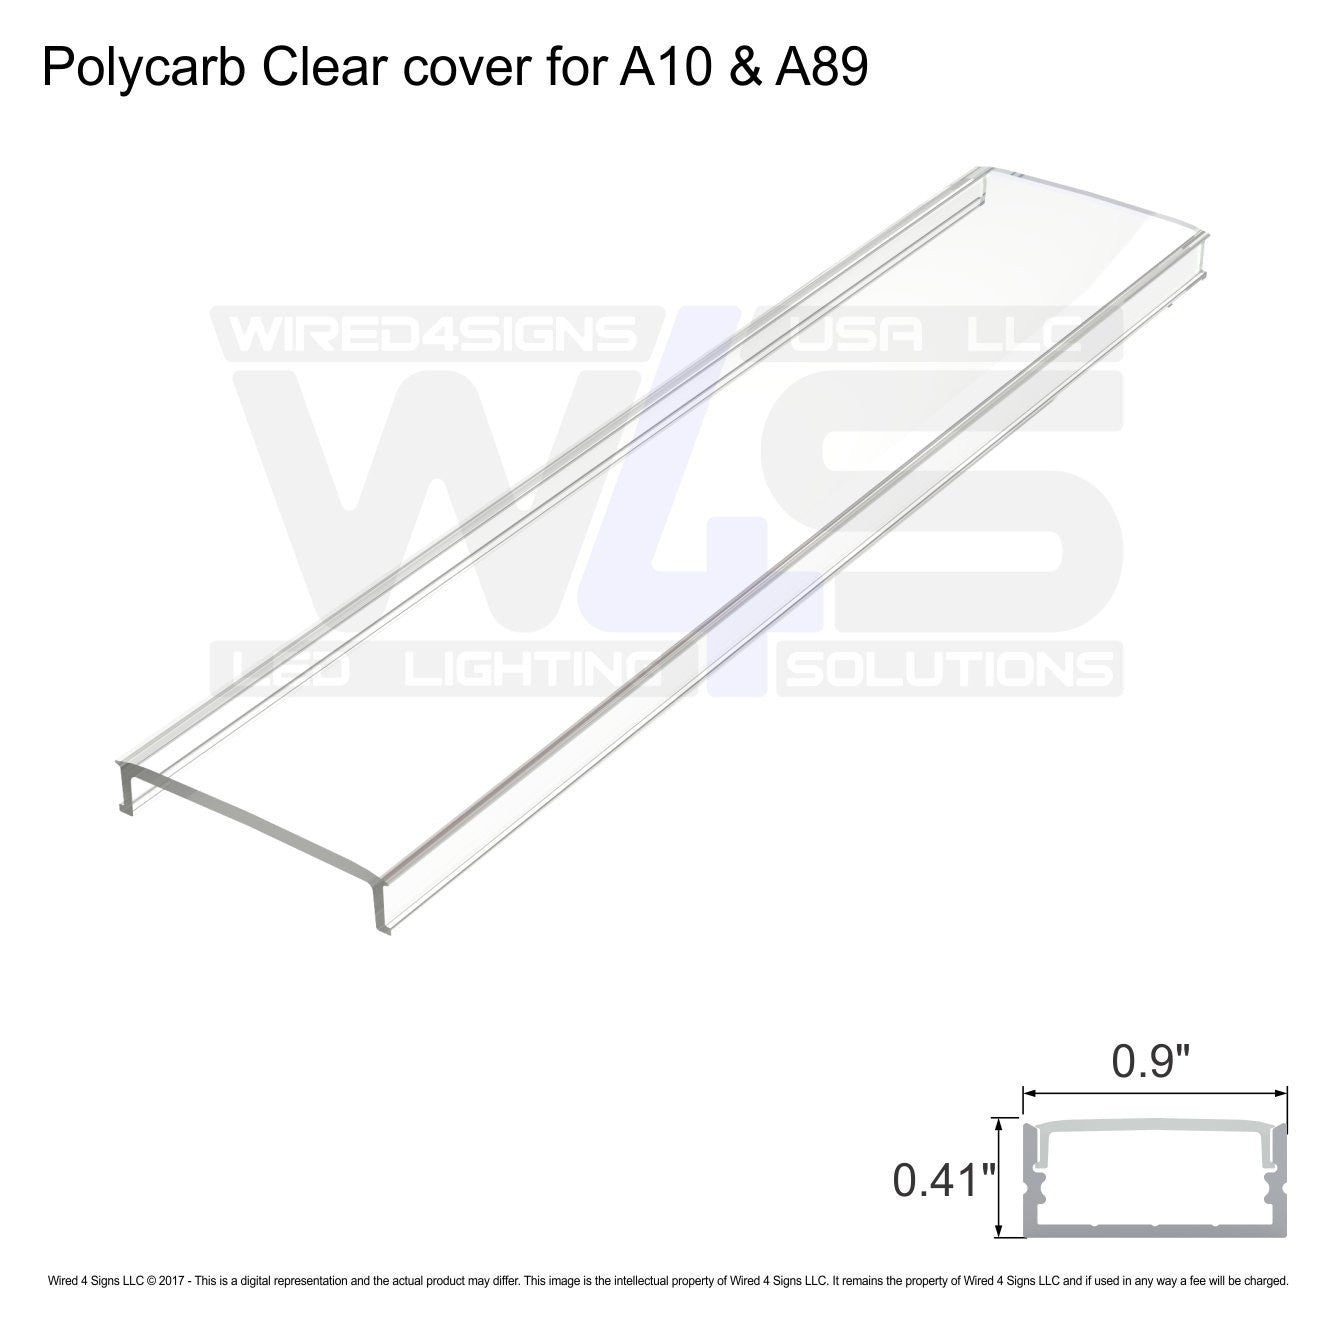 Polycarb Clear cover for A10 & A89 - Dif4 (2m/6.56ft length)